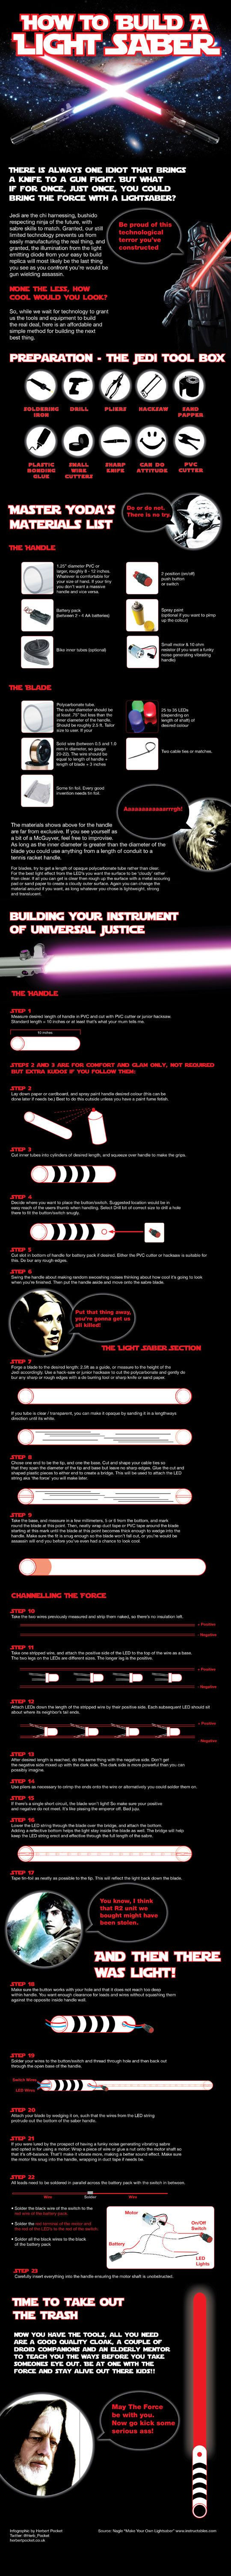 Infographic: How To Make your Own Lightsaber